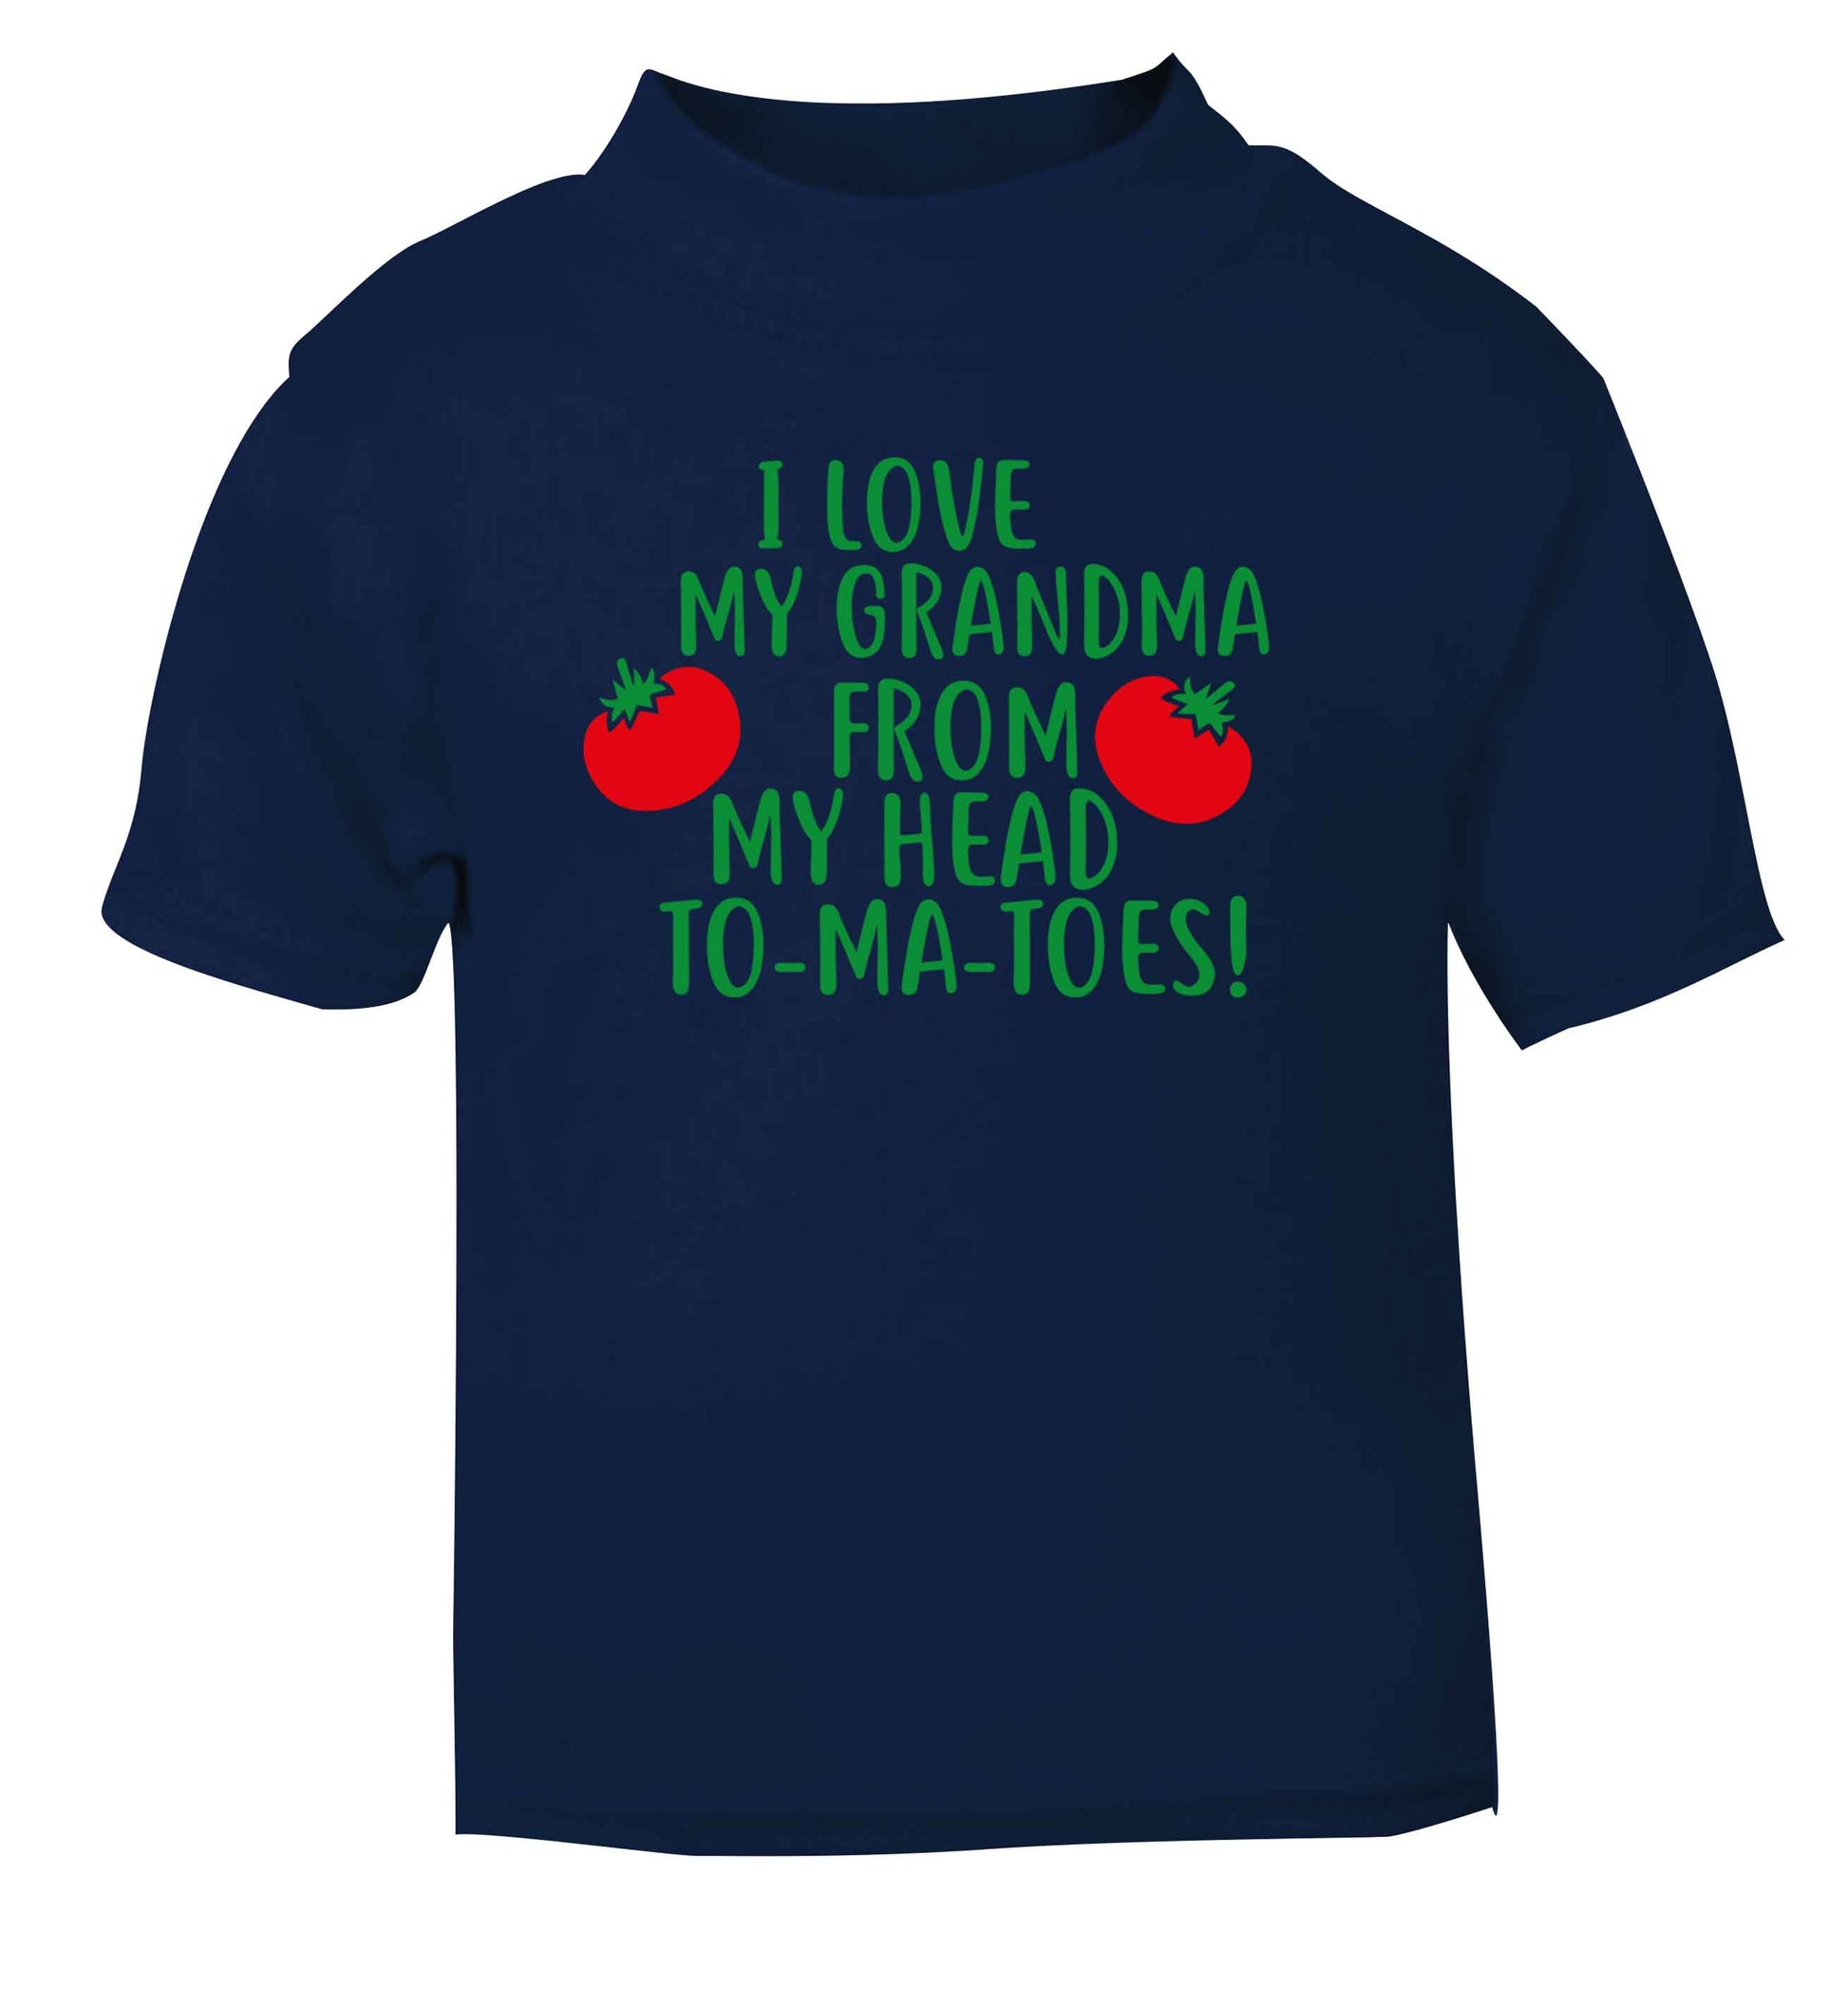 I love my grandma from my head to-ma-toes navy Baby Toddler Tshirt 2 Years